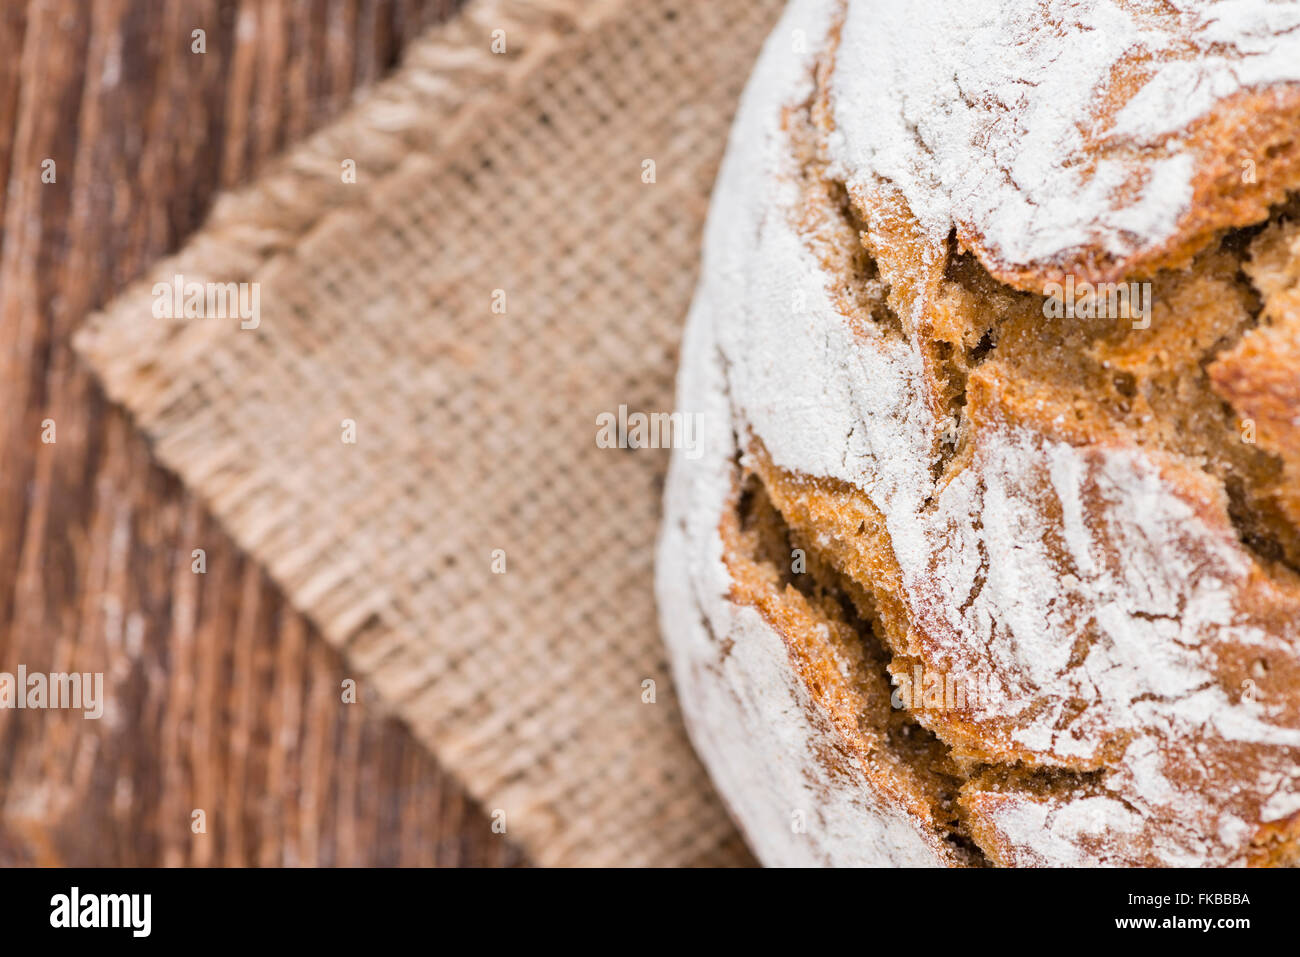 Fresh baked Loaf of Bread (as detailed close-up shot) Stock Photo